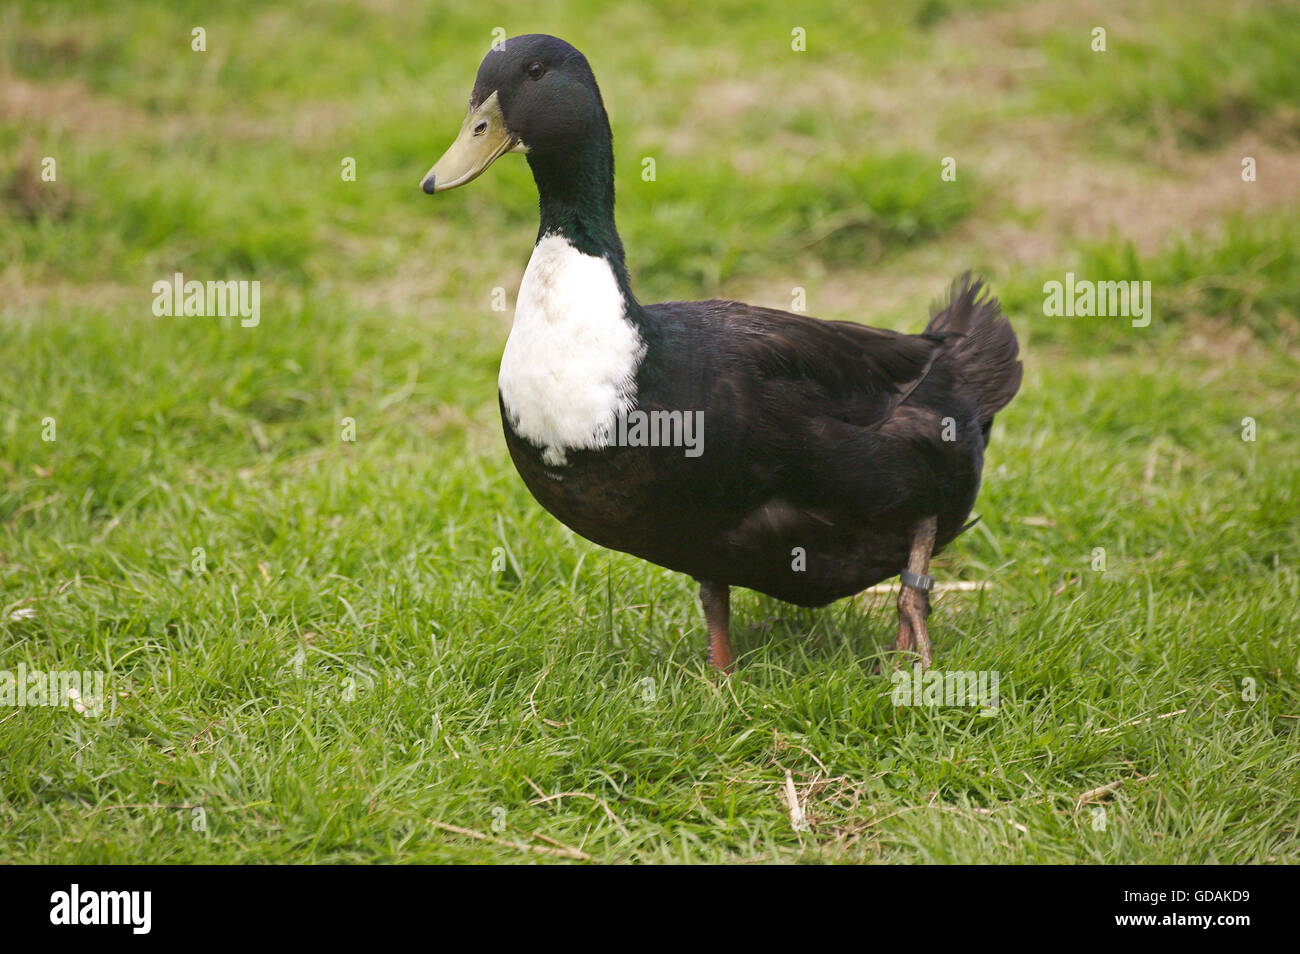 https://c8.alamy.com/comp/GDAKD9/duclair-domestic-duck-a-french-breed-from-normandy-GDAKD9.jpg